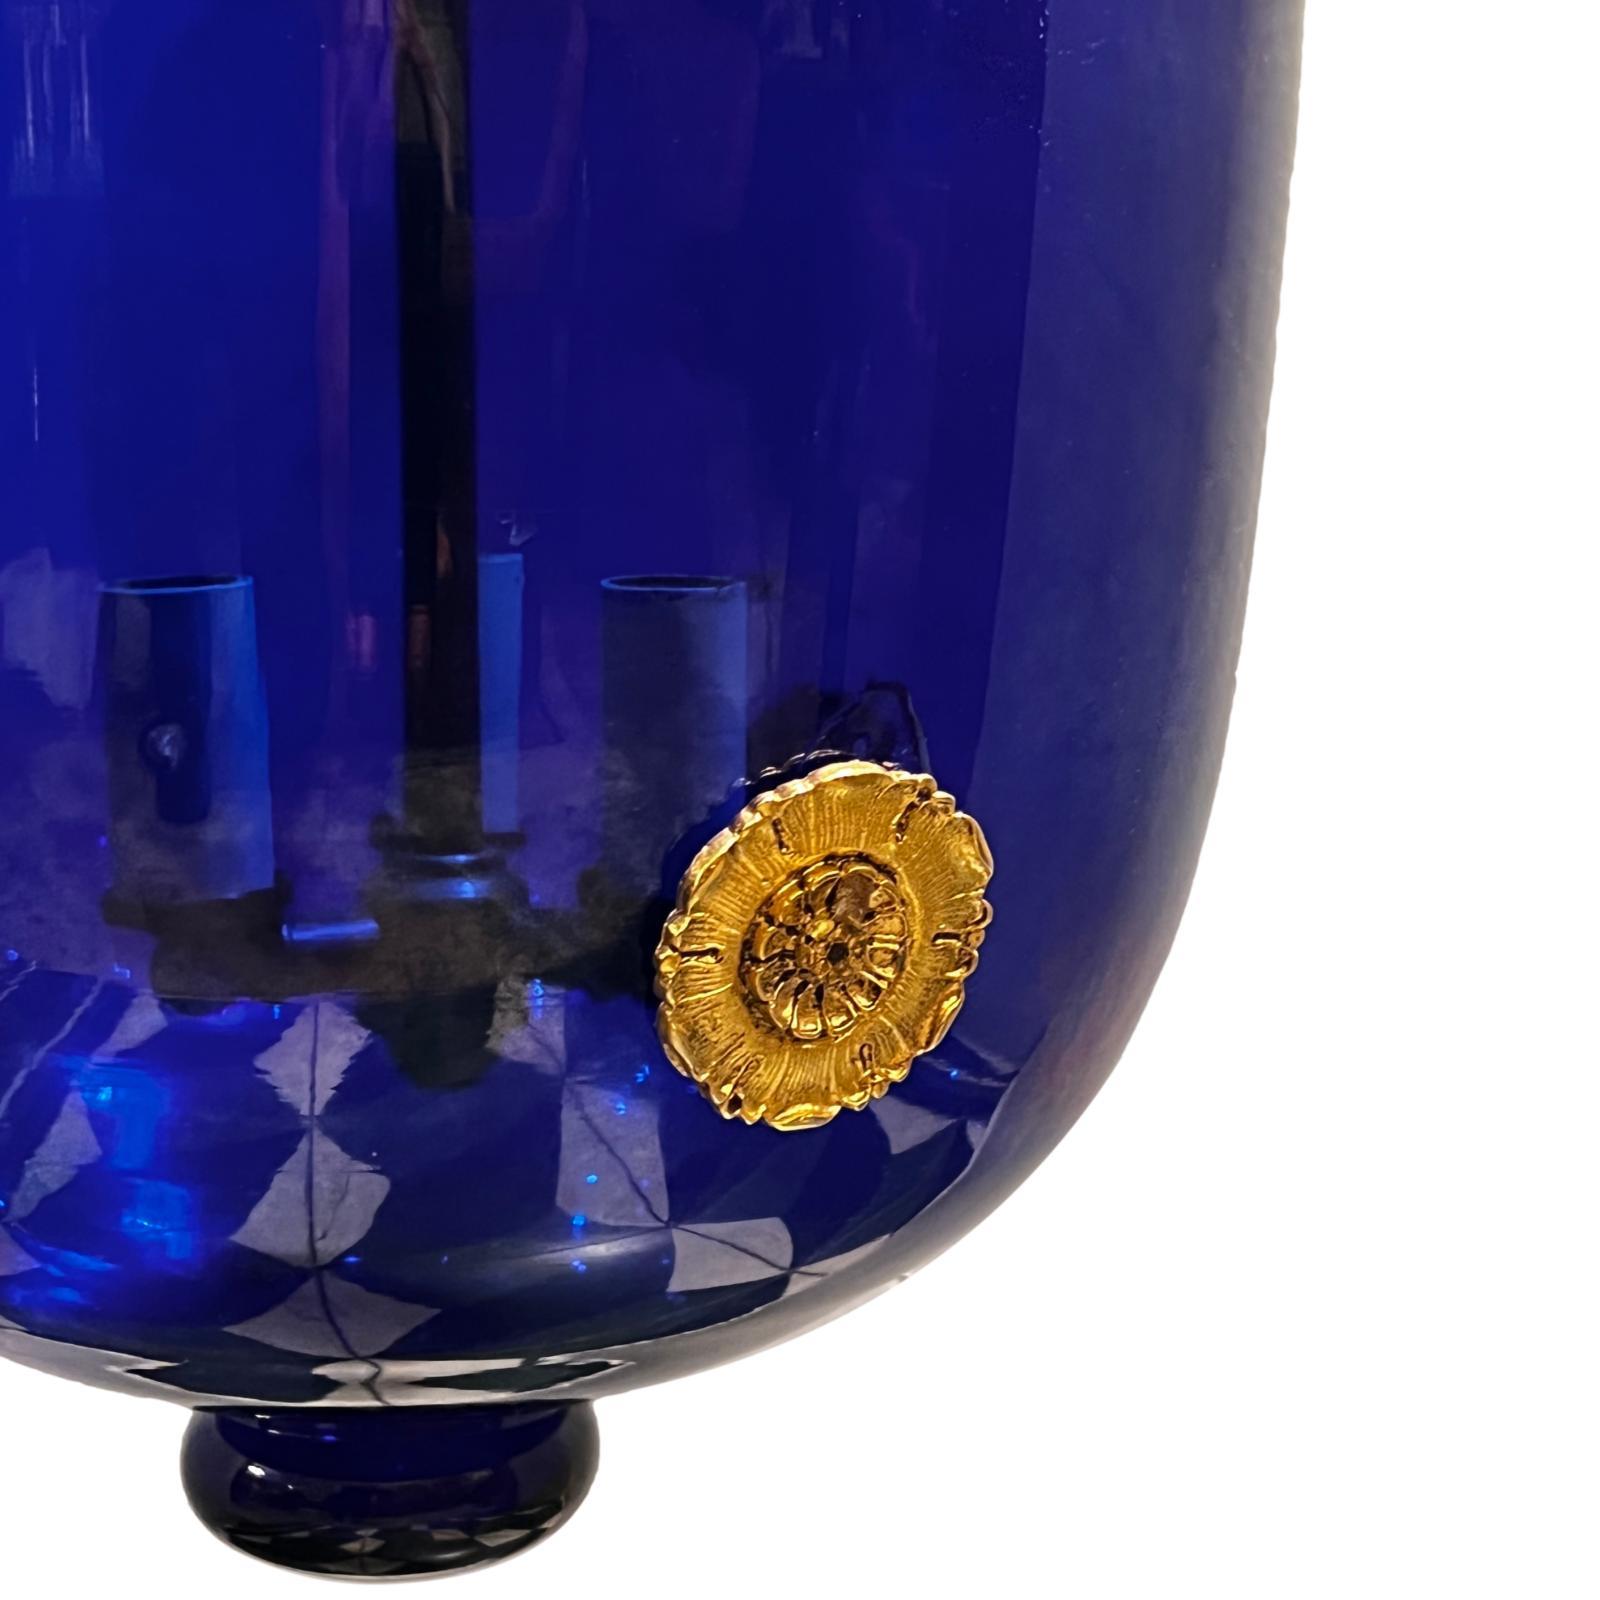 A circa 1960's French cobalt blue glass lantern with gilt bronze details and patinated hardware.

Measurements:
Drop: 21